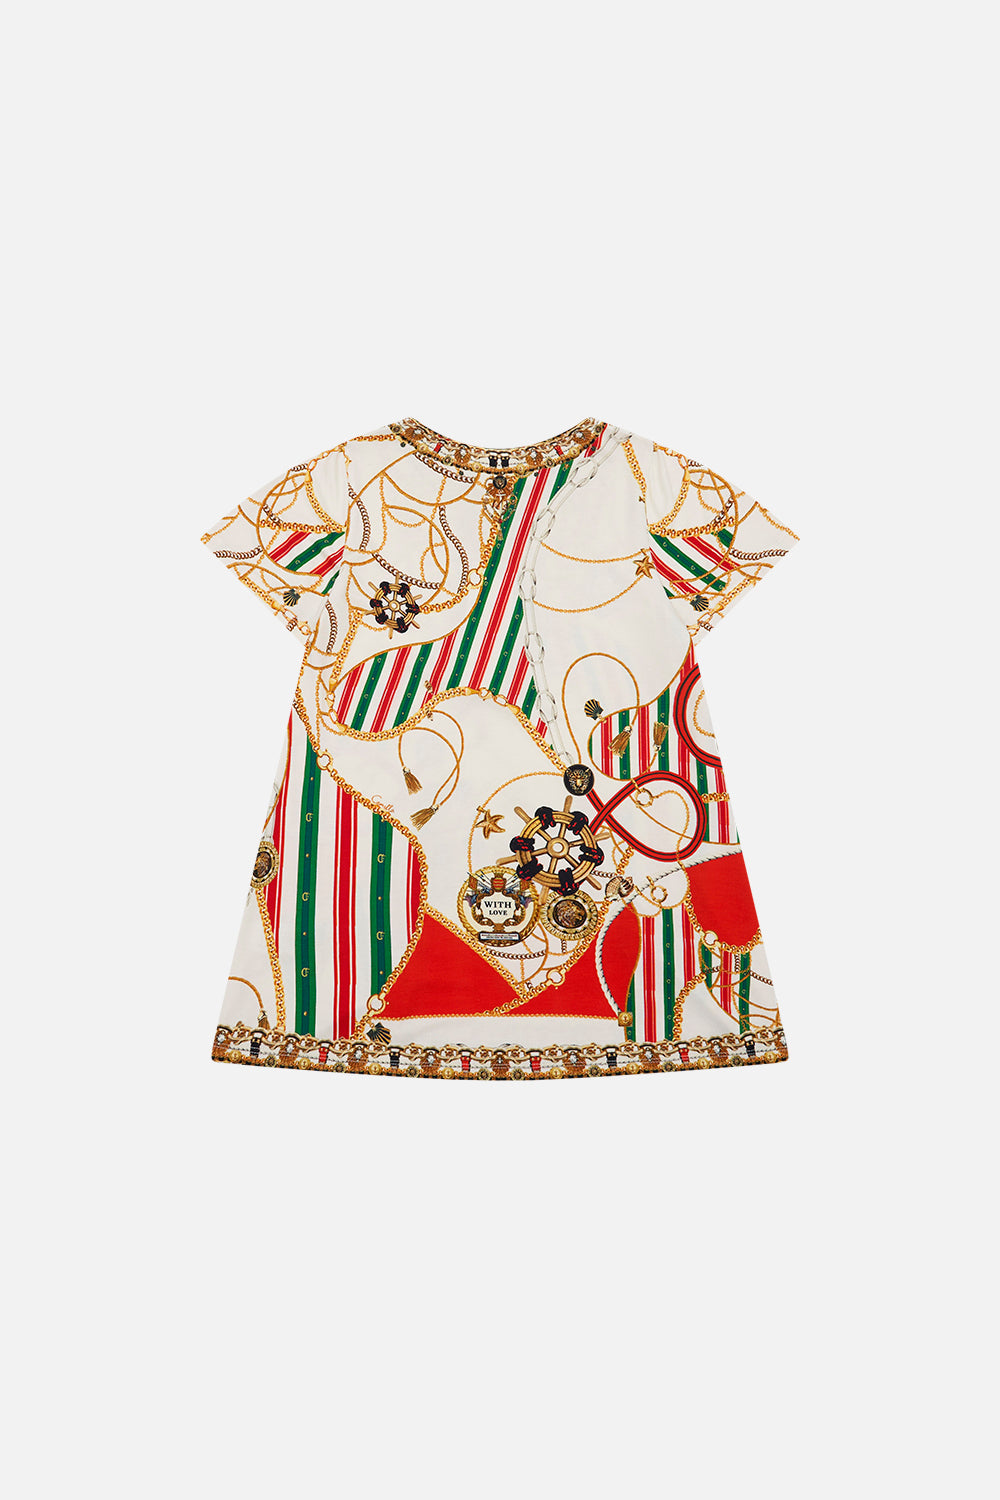 Product view of Milla By CAMILLA kids t shirt dress in Saluti Summertime print